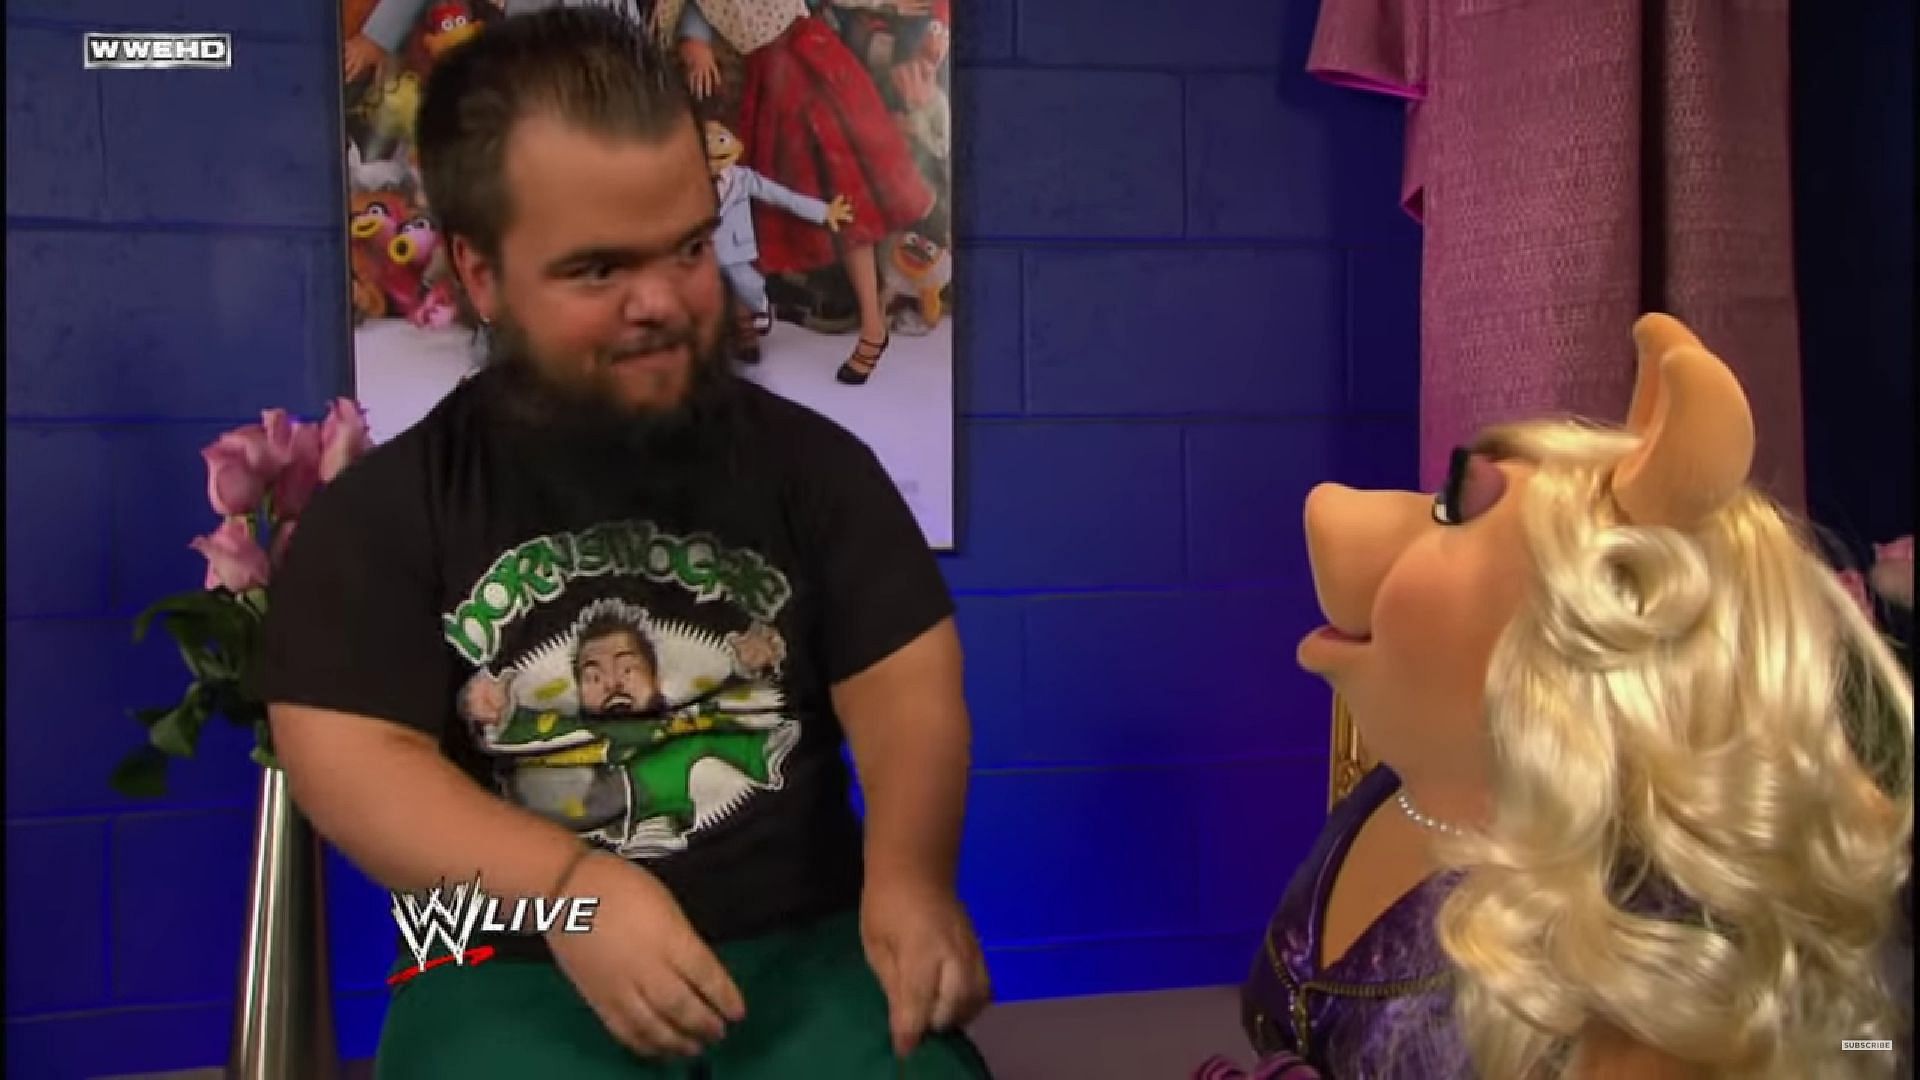 The Muppets were one of the guest hosts for Monday Night RAW.